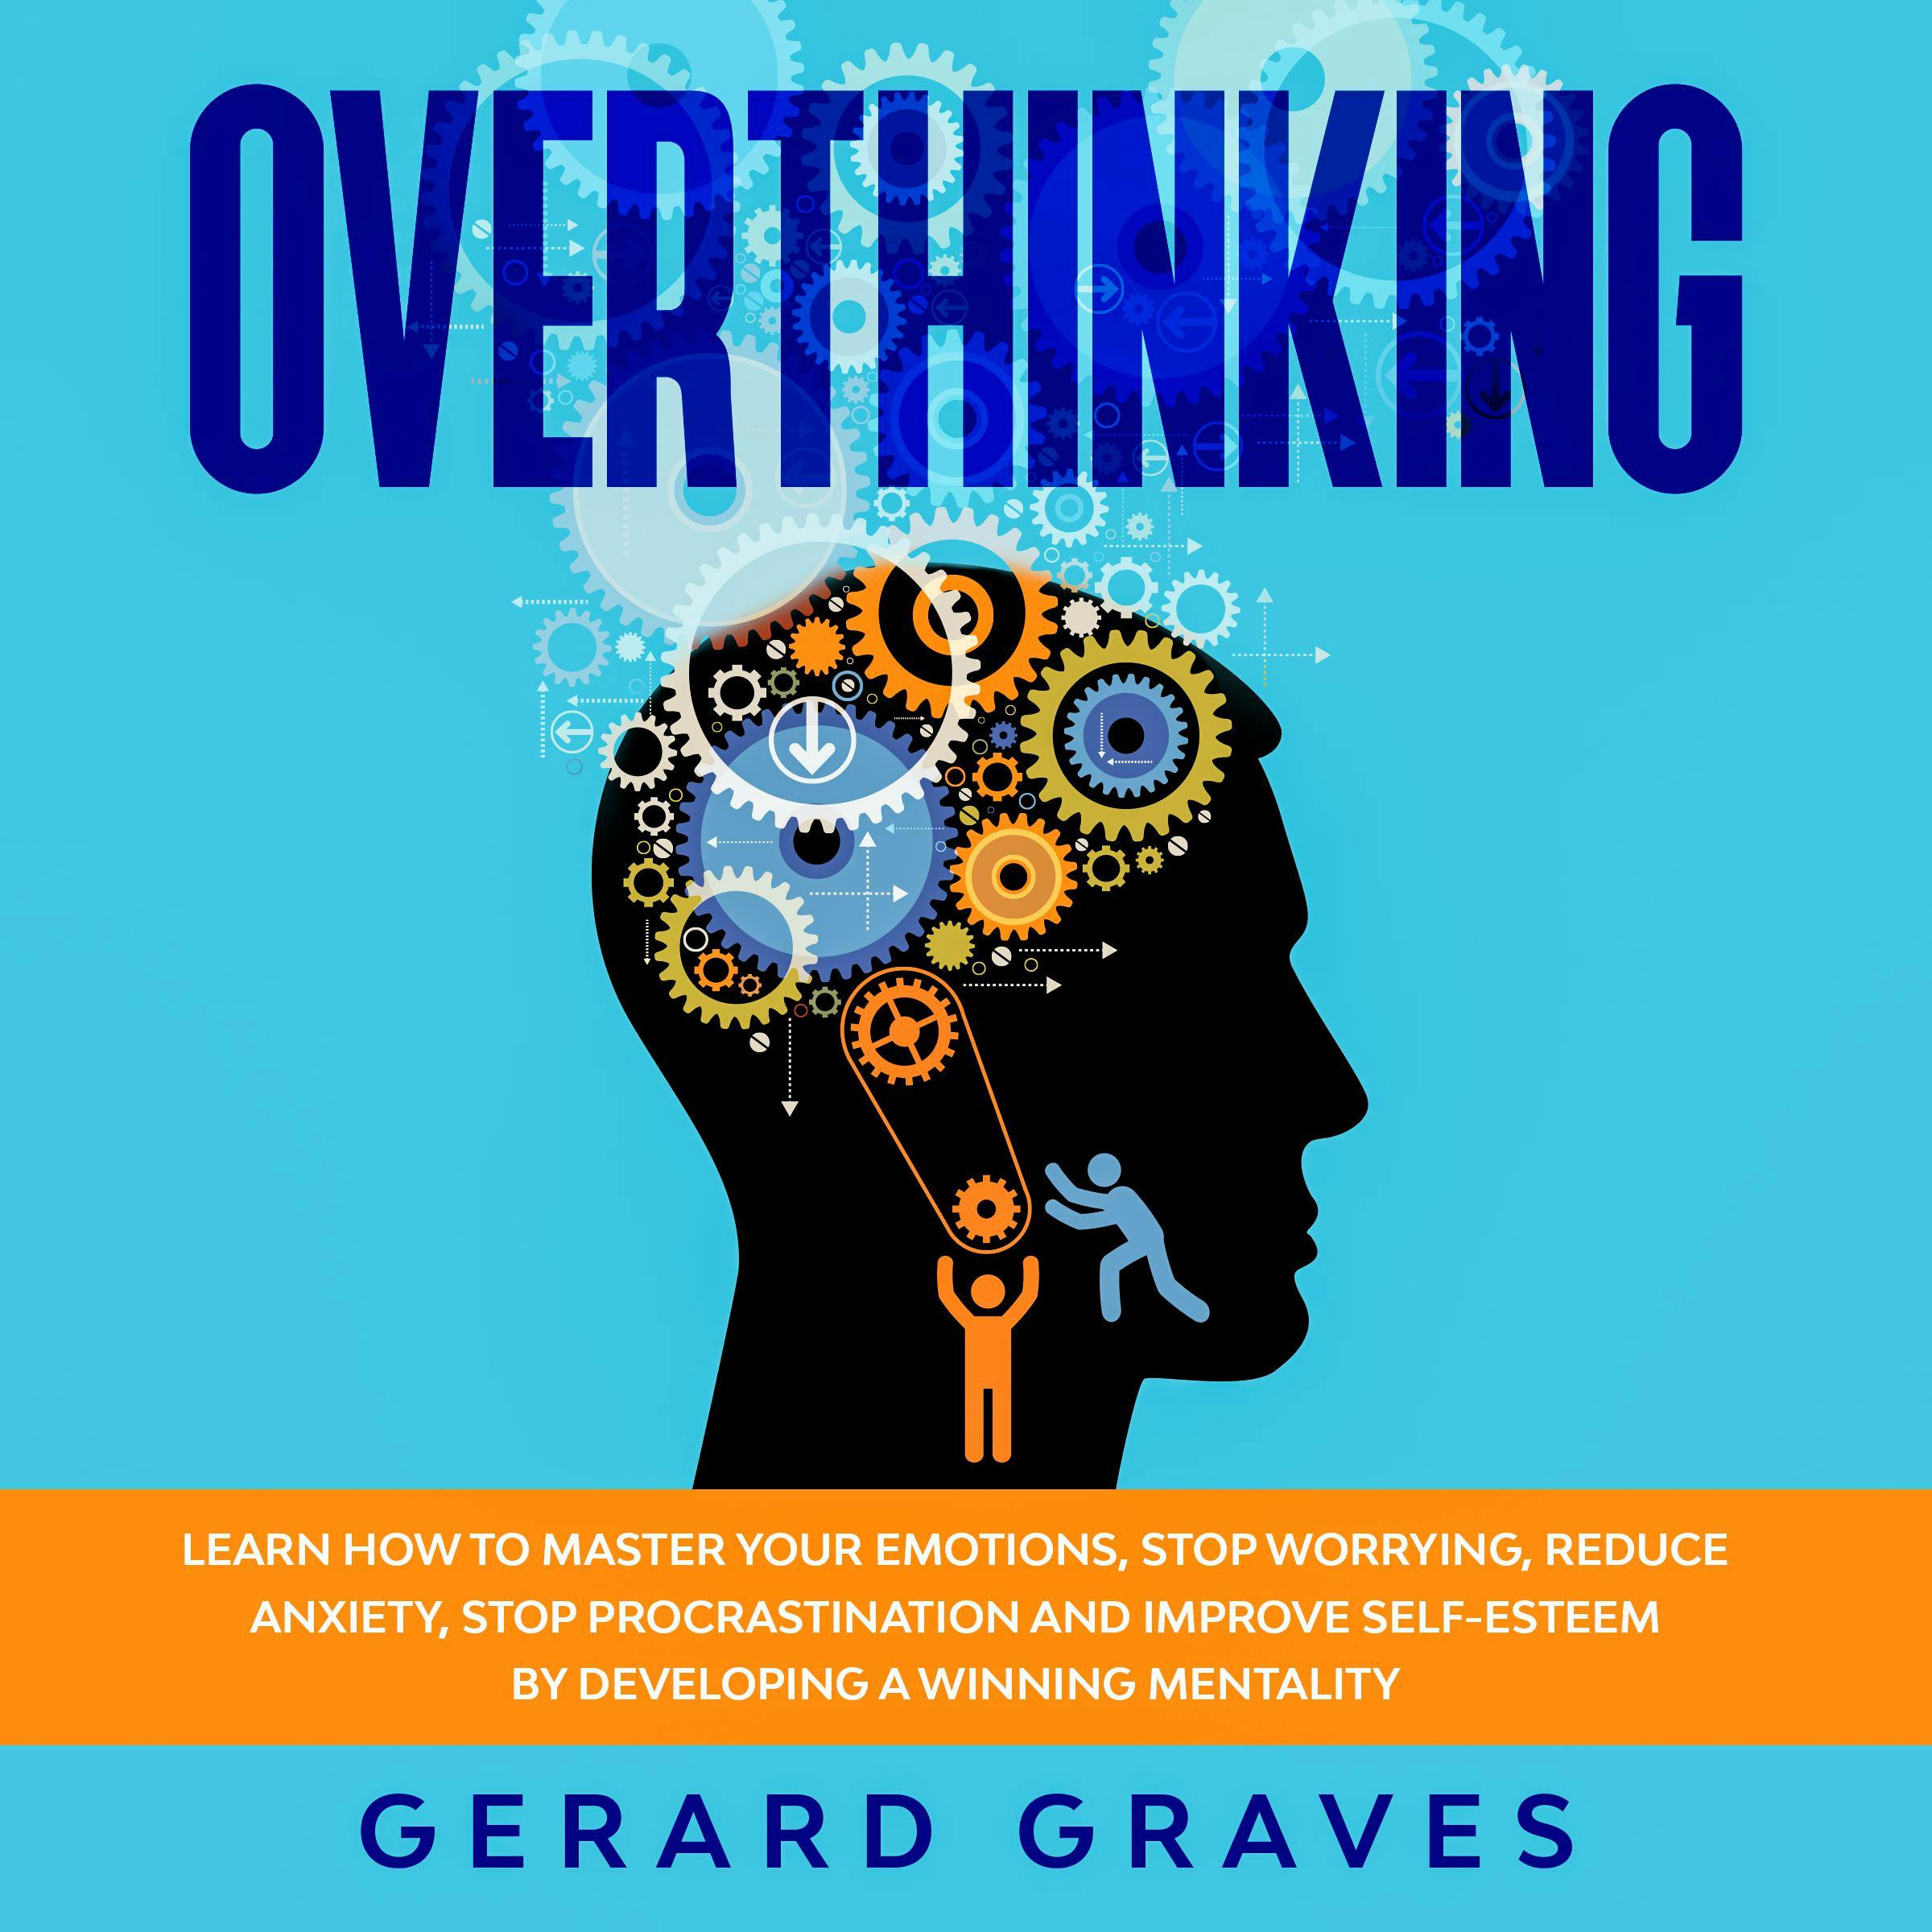 Overthinking: Learn How to Master Your Emotions, Stop Worrying, Reduce Anxiety, Stop Procrastination, and Improve Self-Esteem by Developing a Winning Mentality - undefined